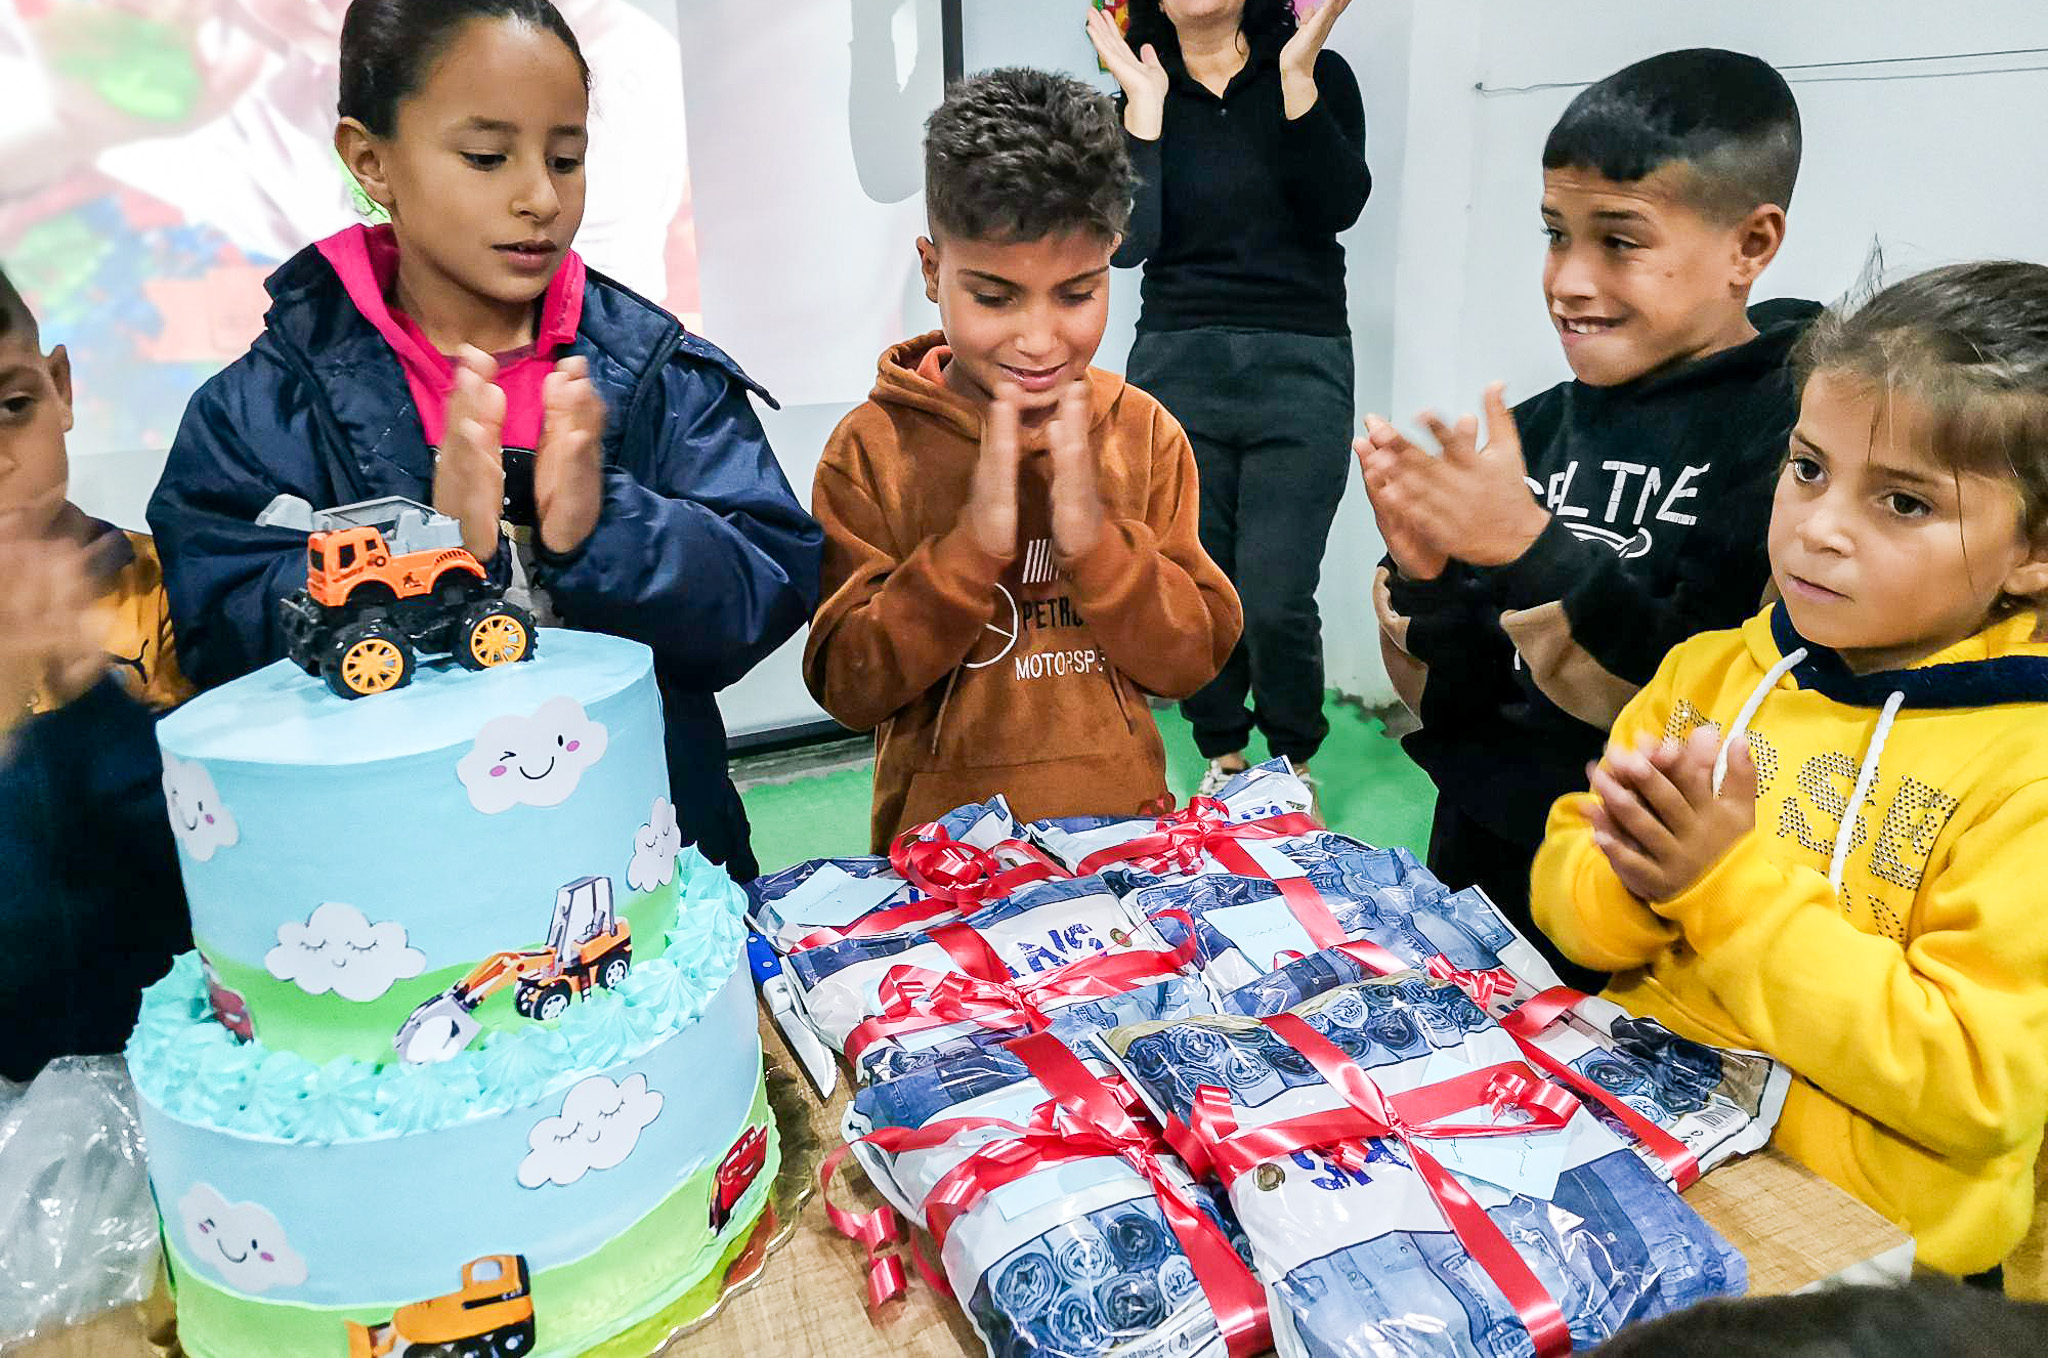 children stand around a table with a cake and gifts